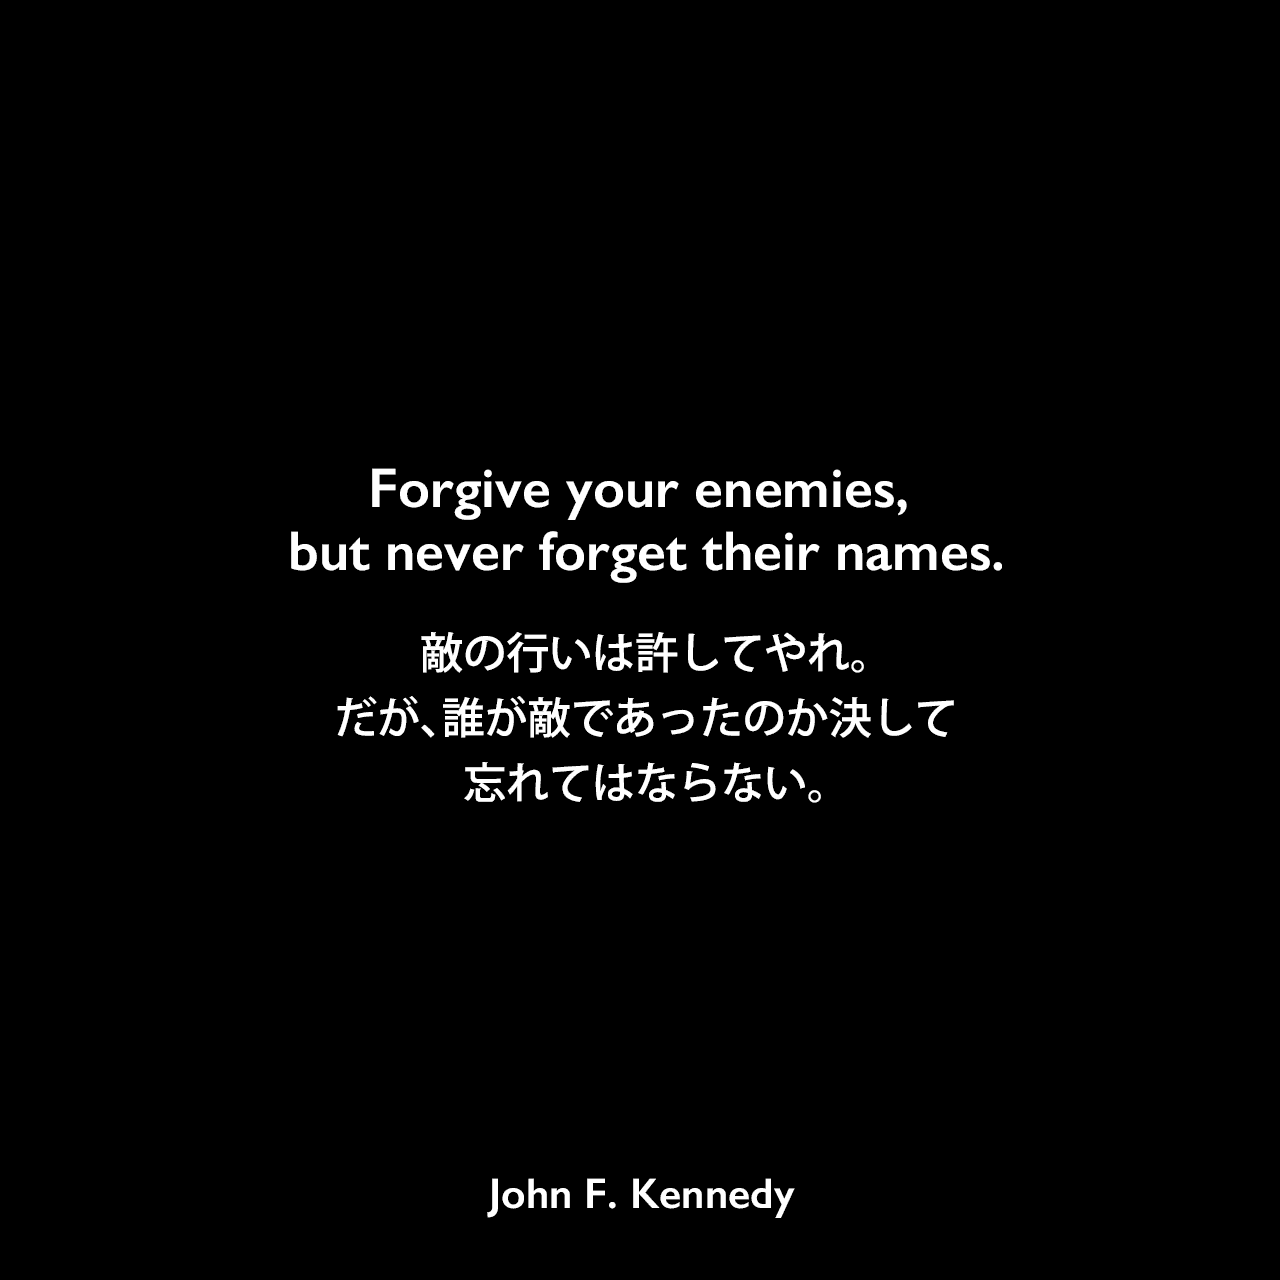 Forgive your enemies, but never forget their names.敵の行いは許してやれ。だが、誰が敵であったのか決して忘れてはならない。John F Kennedy